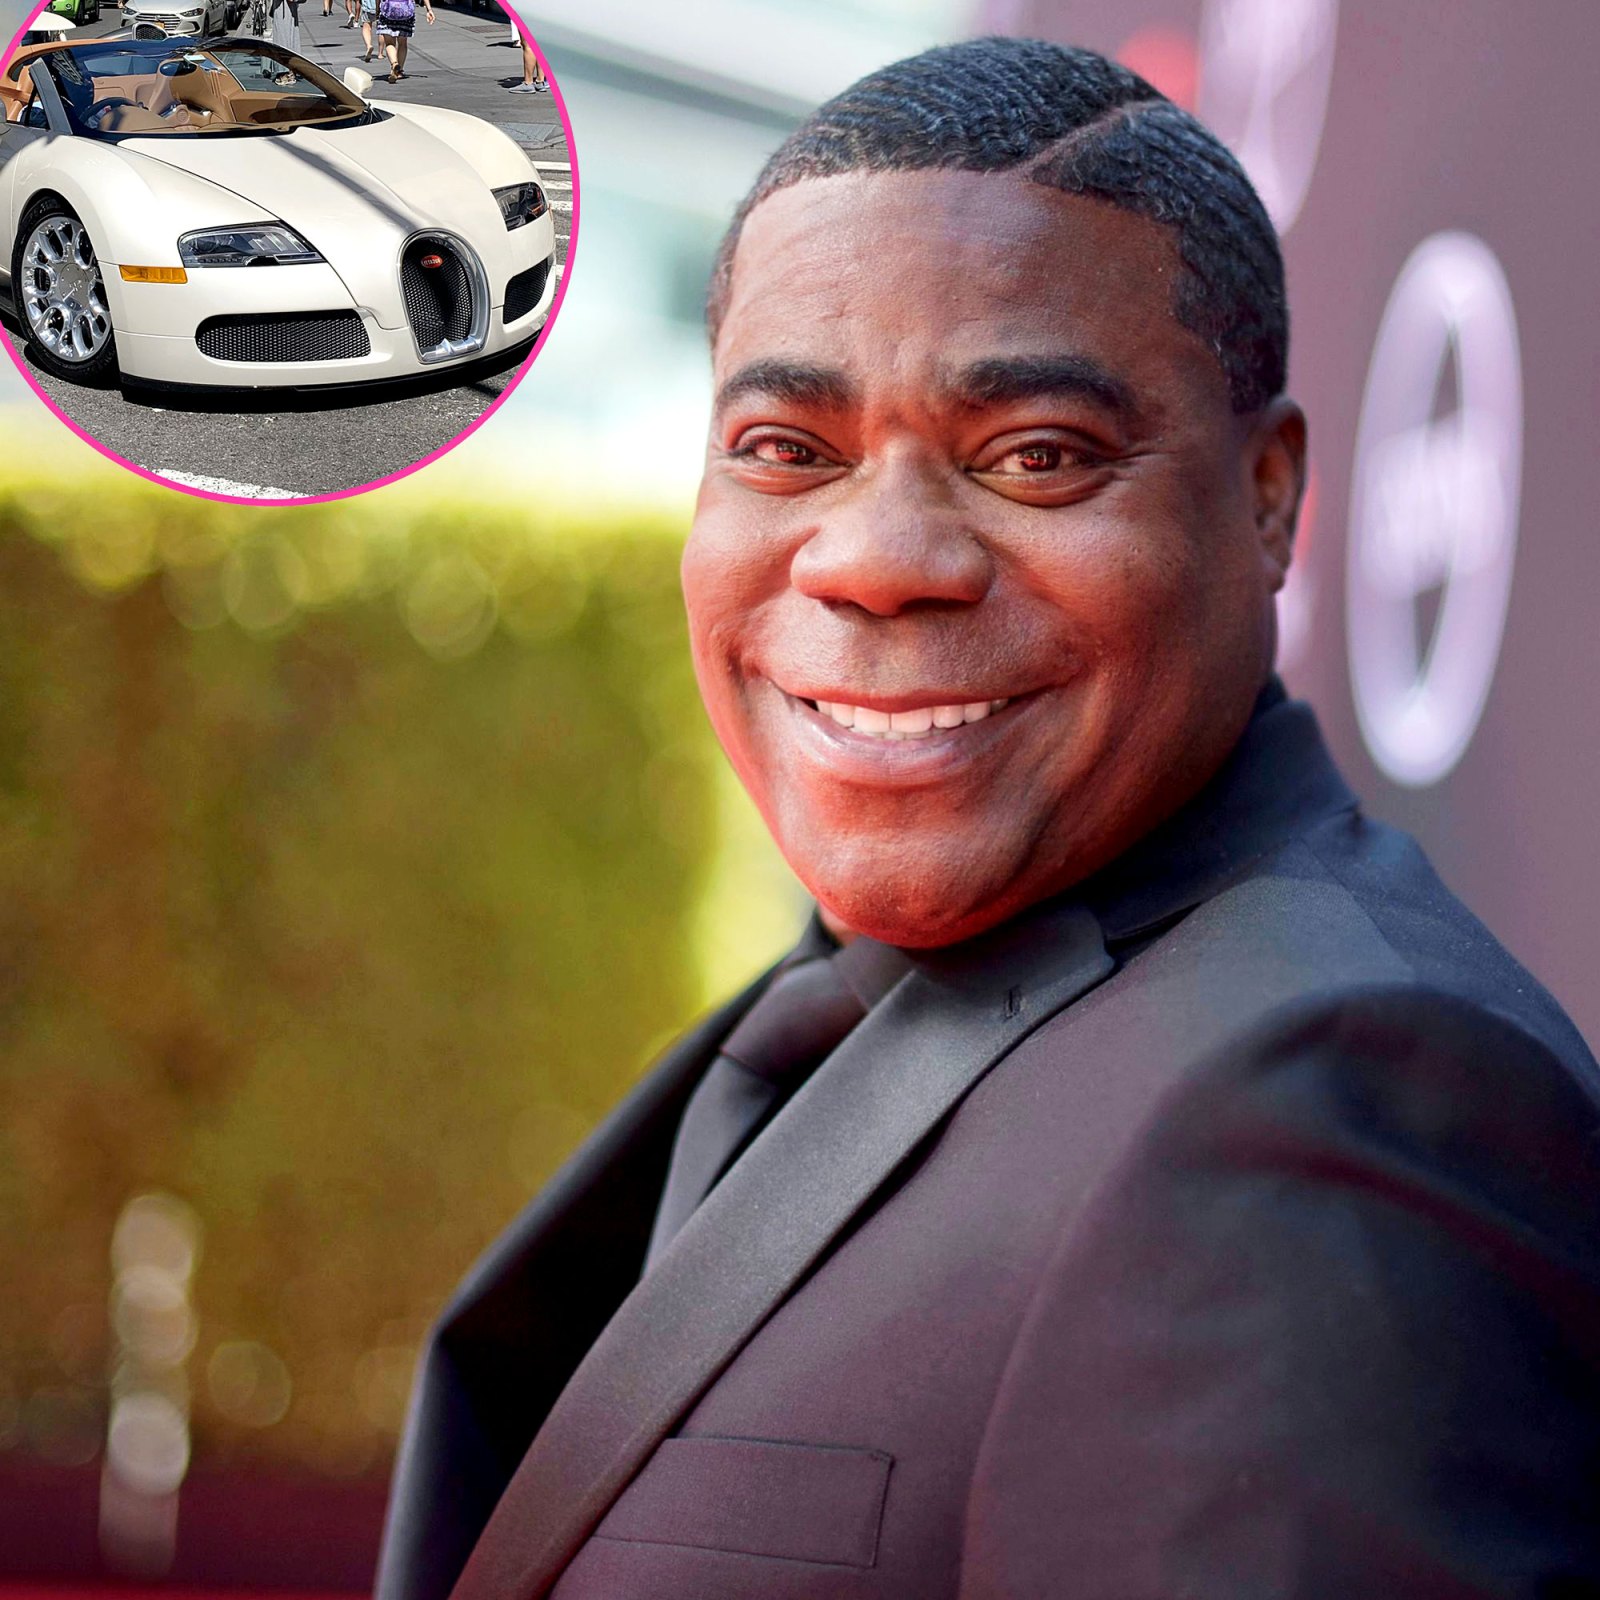 Tracy Morgan Paid Bartender to Watch Bugatti During Dinner